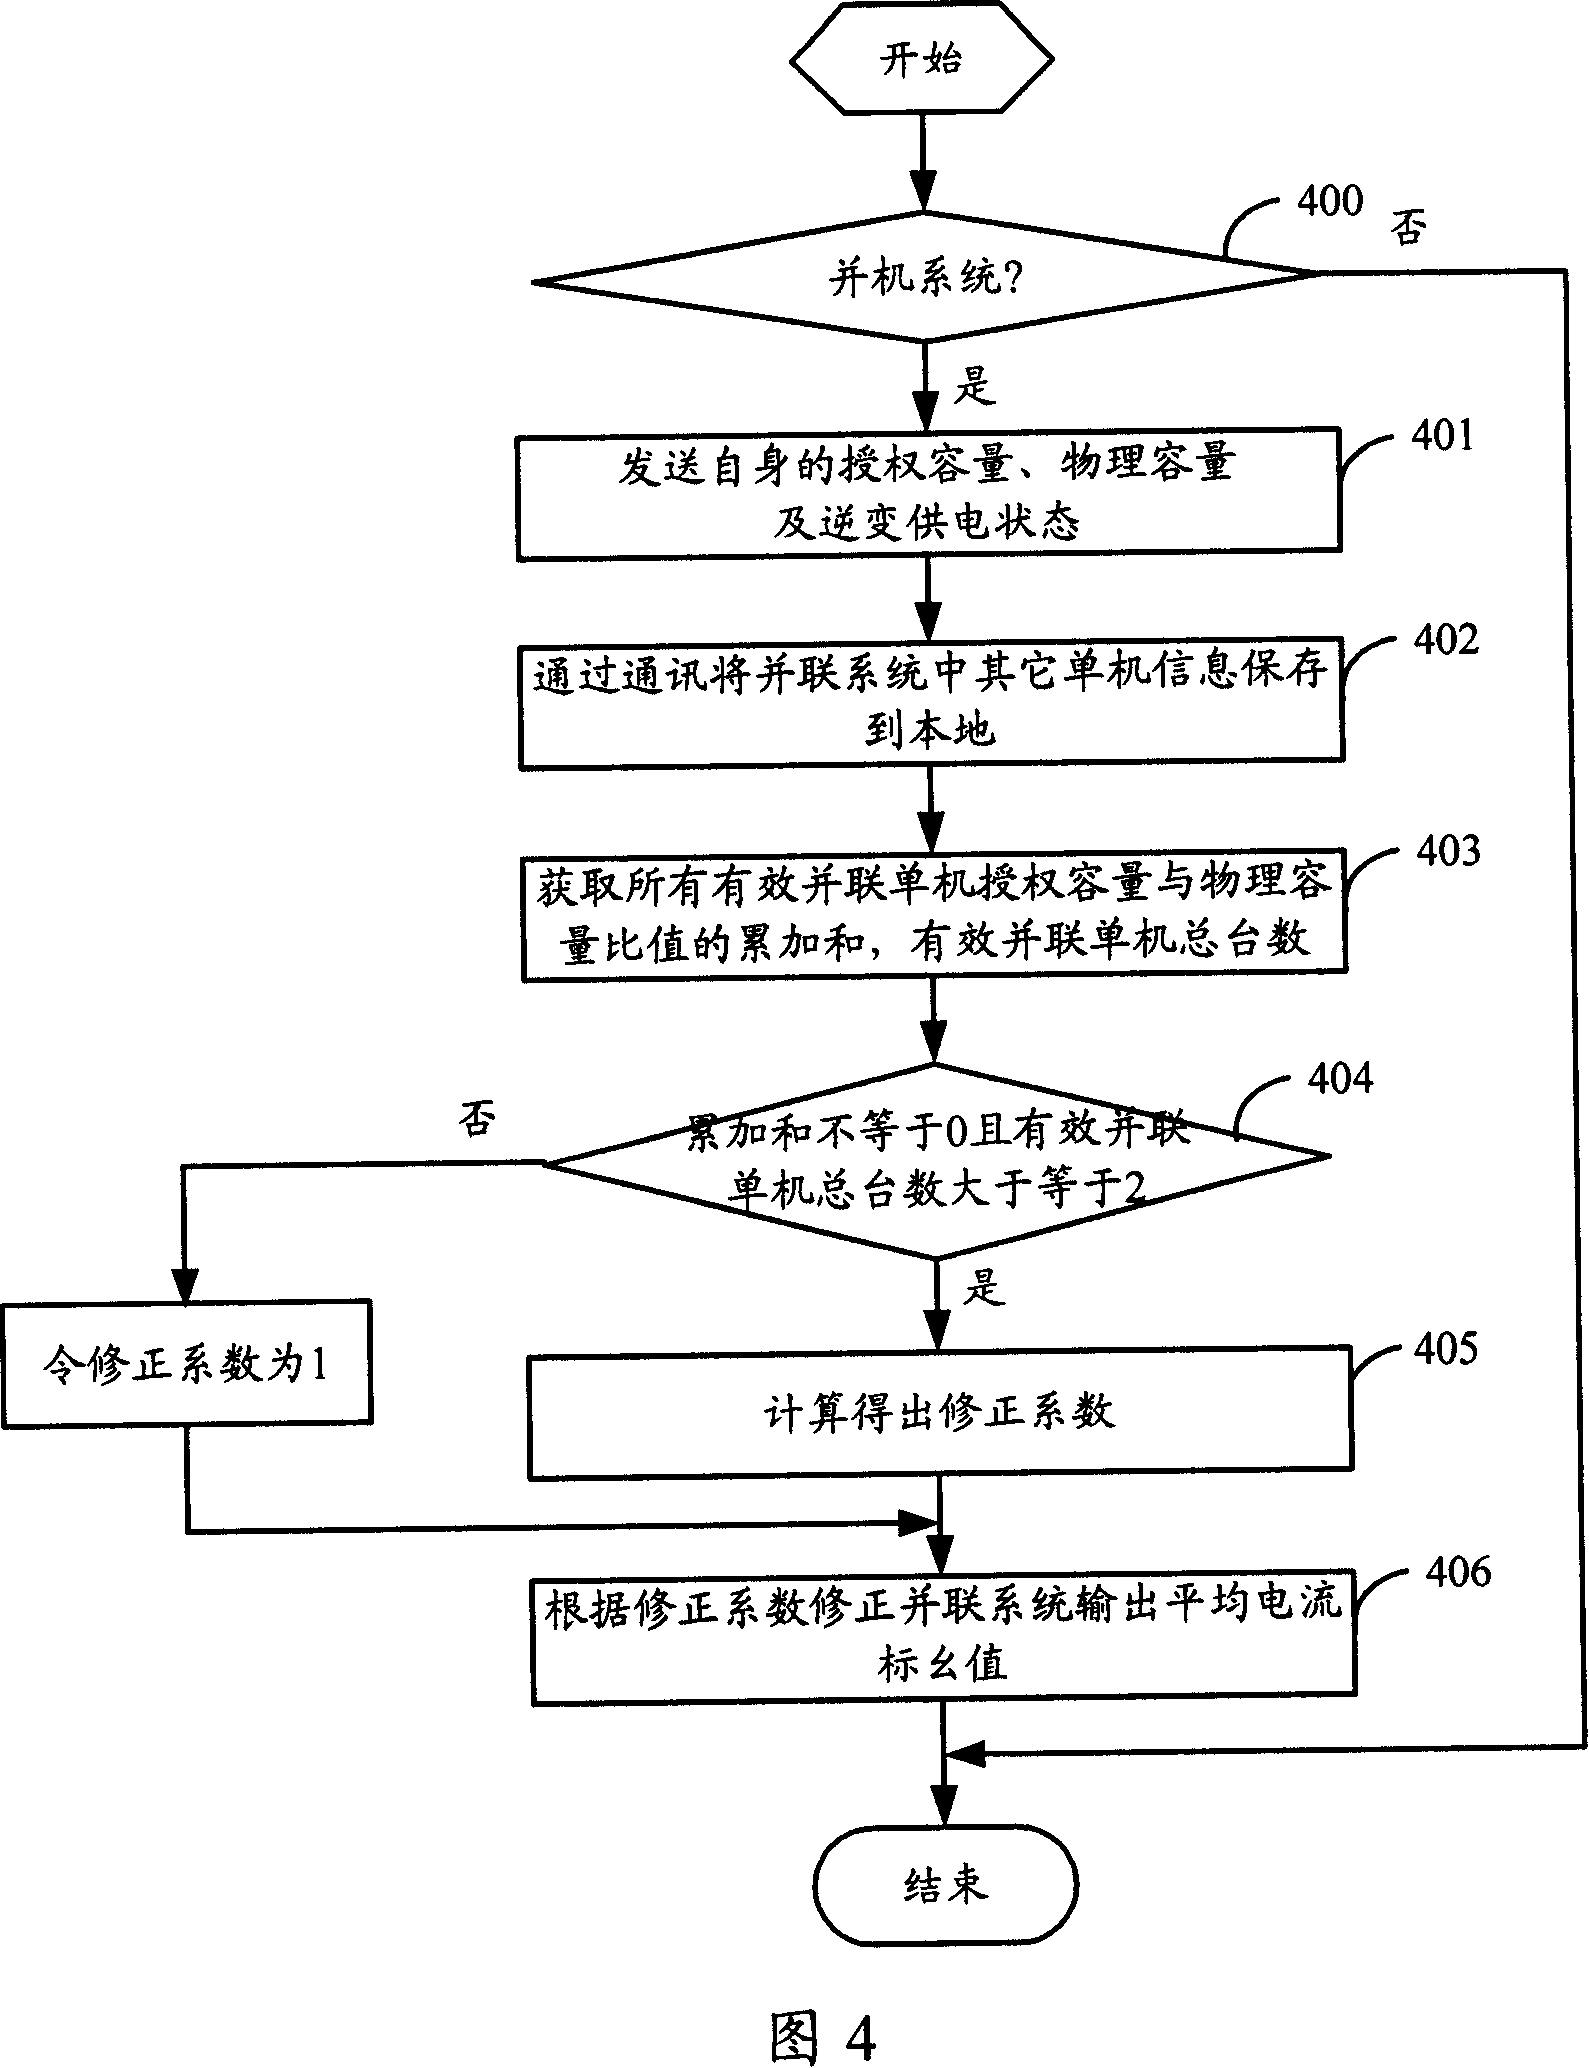 Method and system for parallel connection of UPS derated models with different capacitance grade